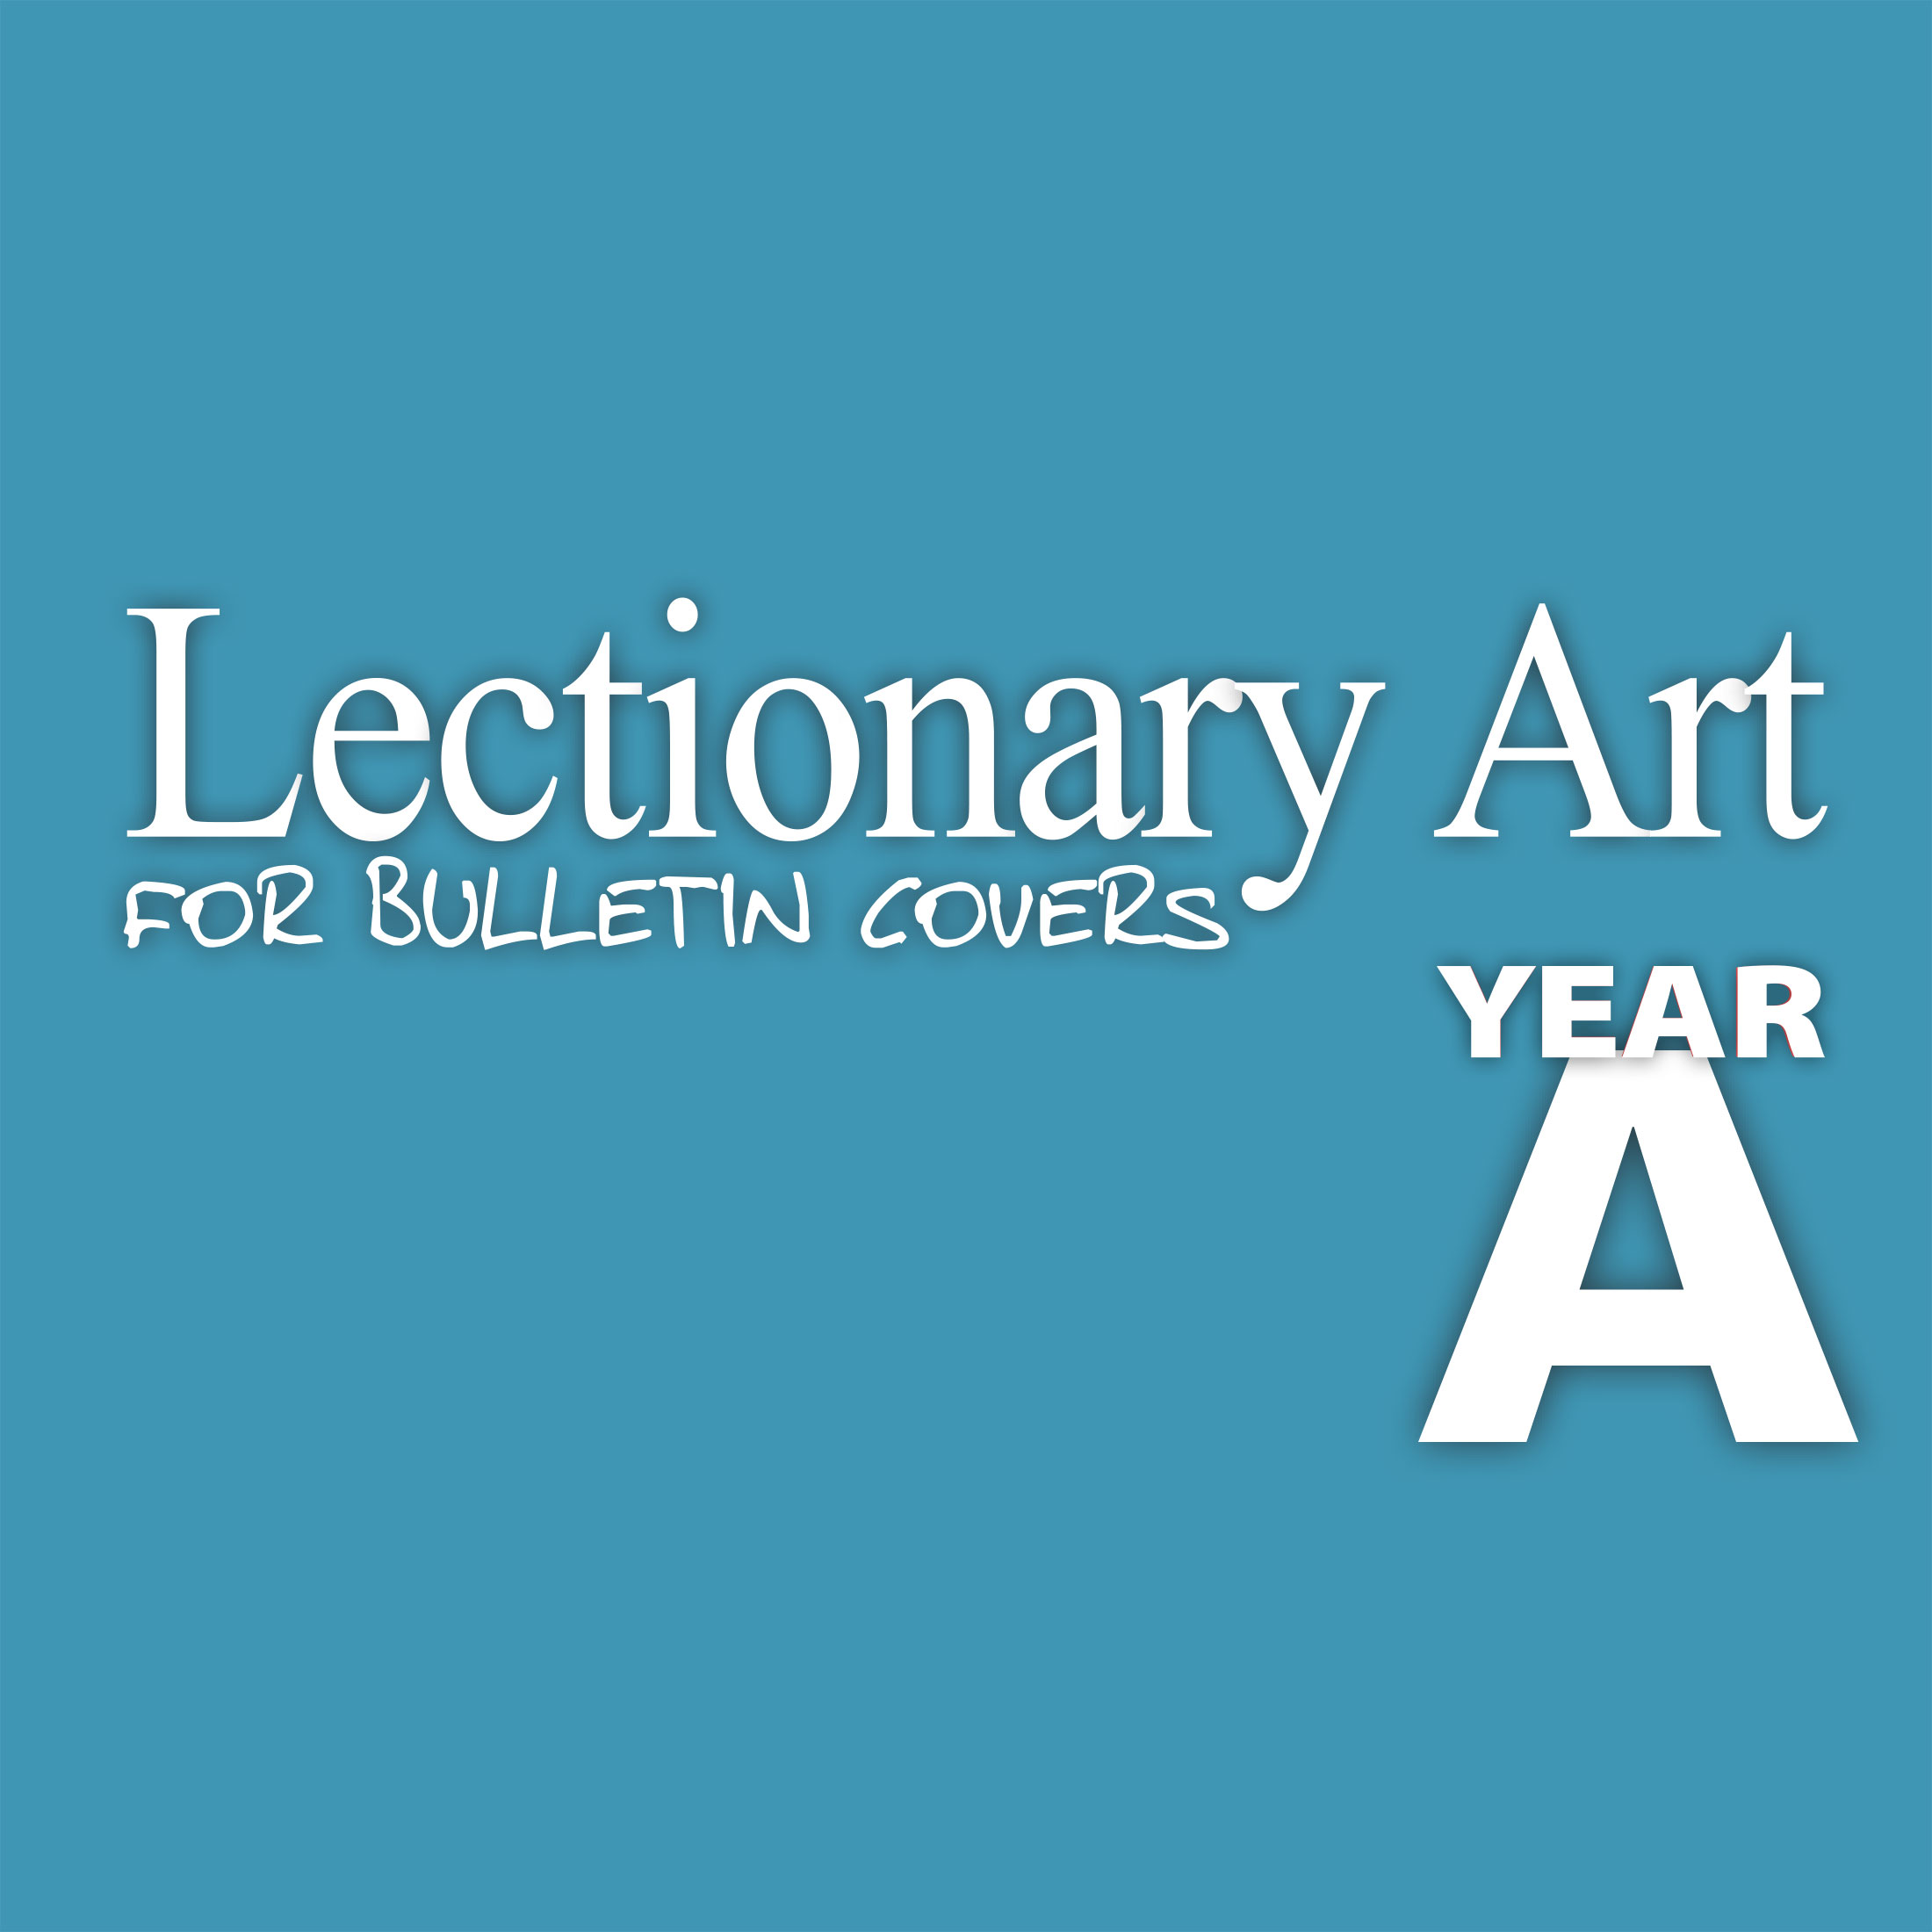 Lectionary Art for Bulletin Covers Year A (20162017)